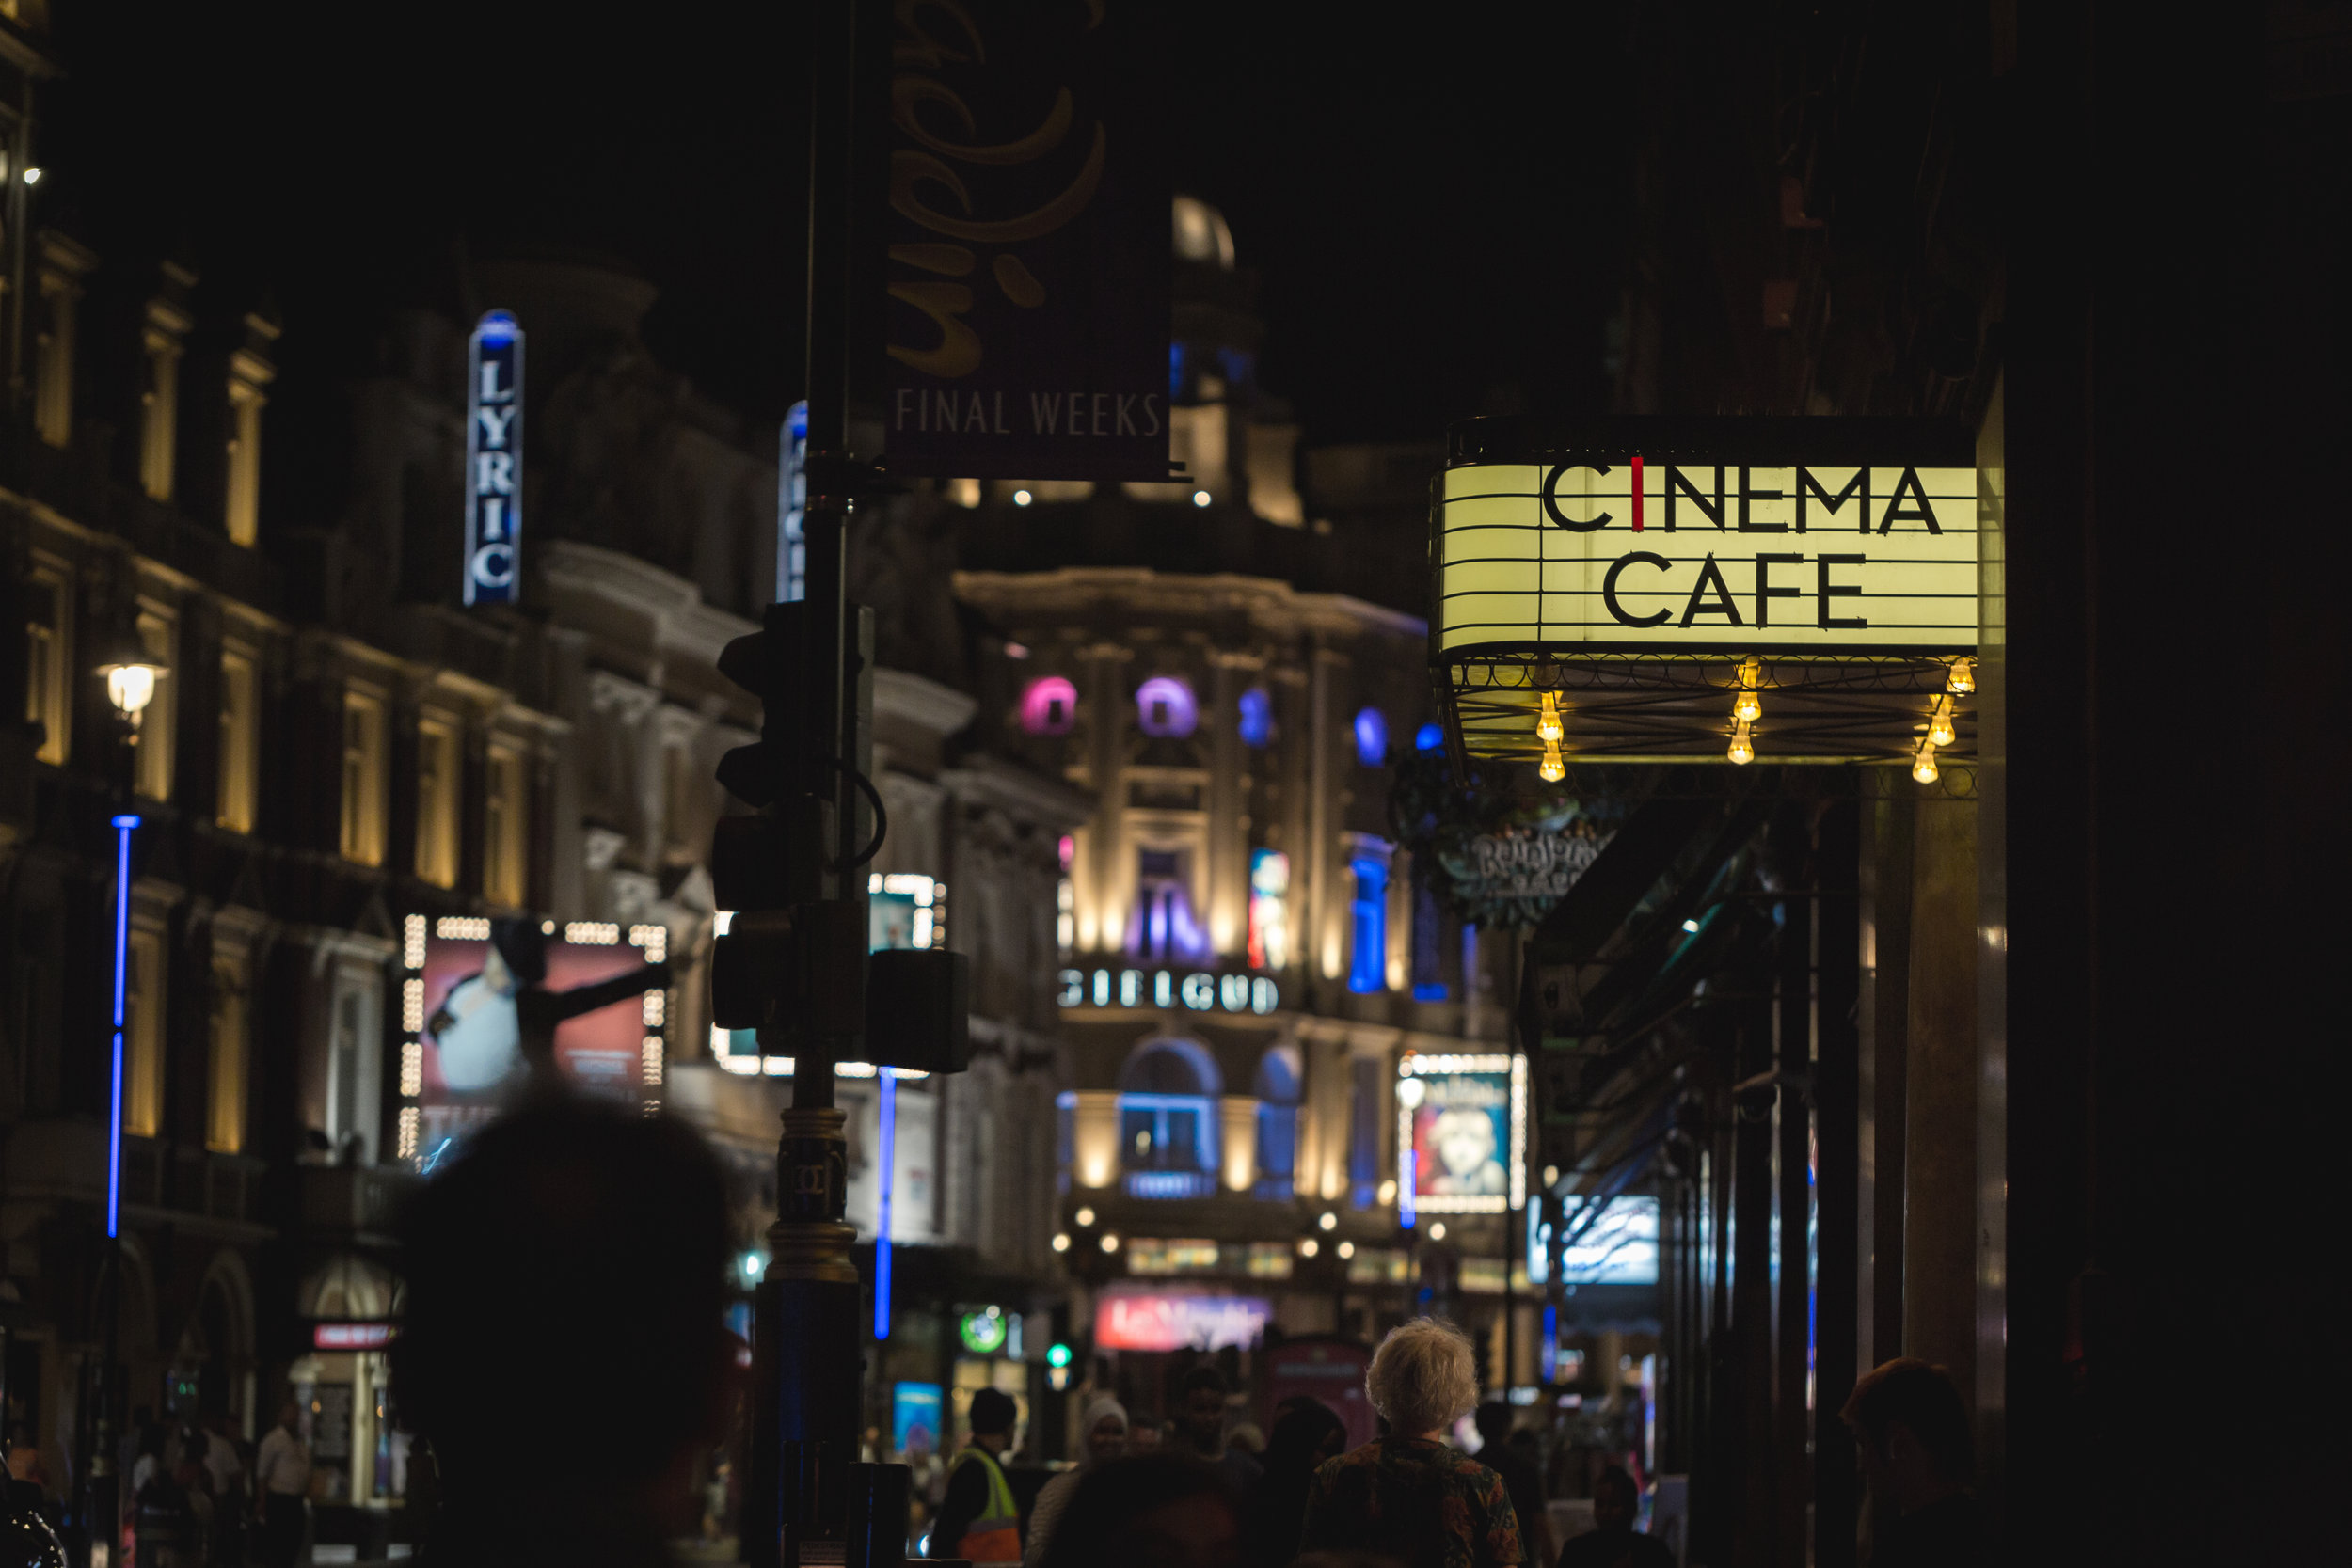 London's vibrant nightlife provides plenty of opportunities to explore and enjoy the city by night. (Copy)